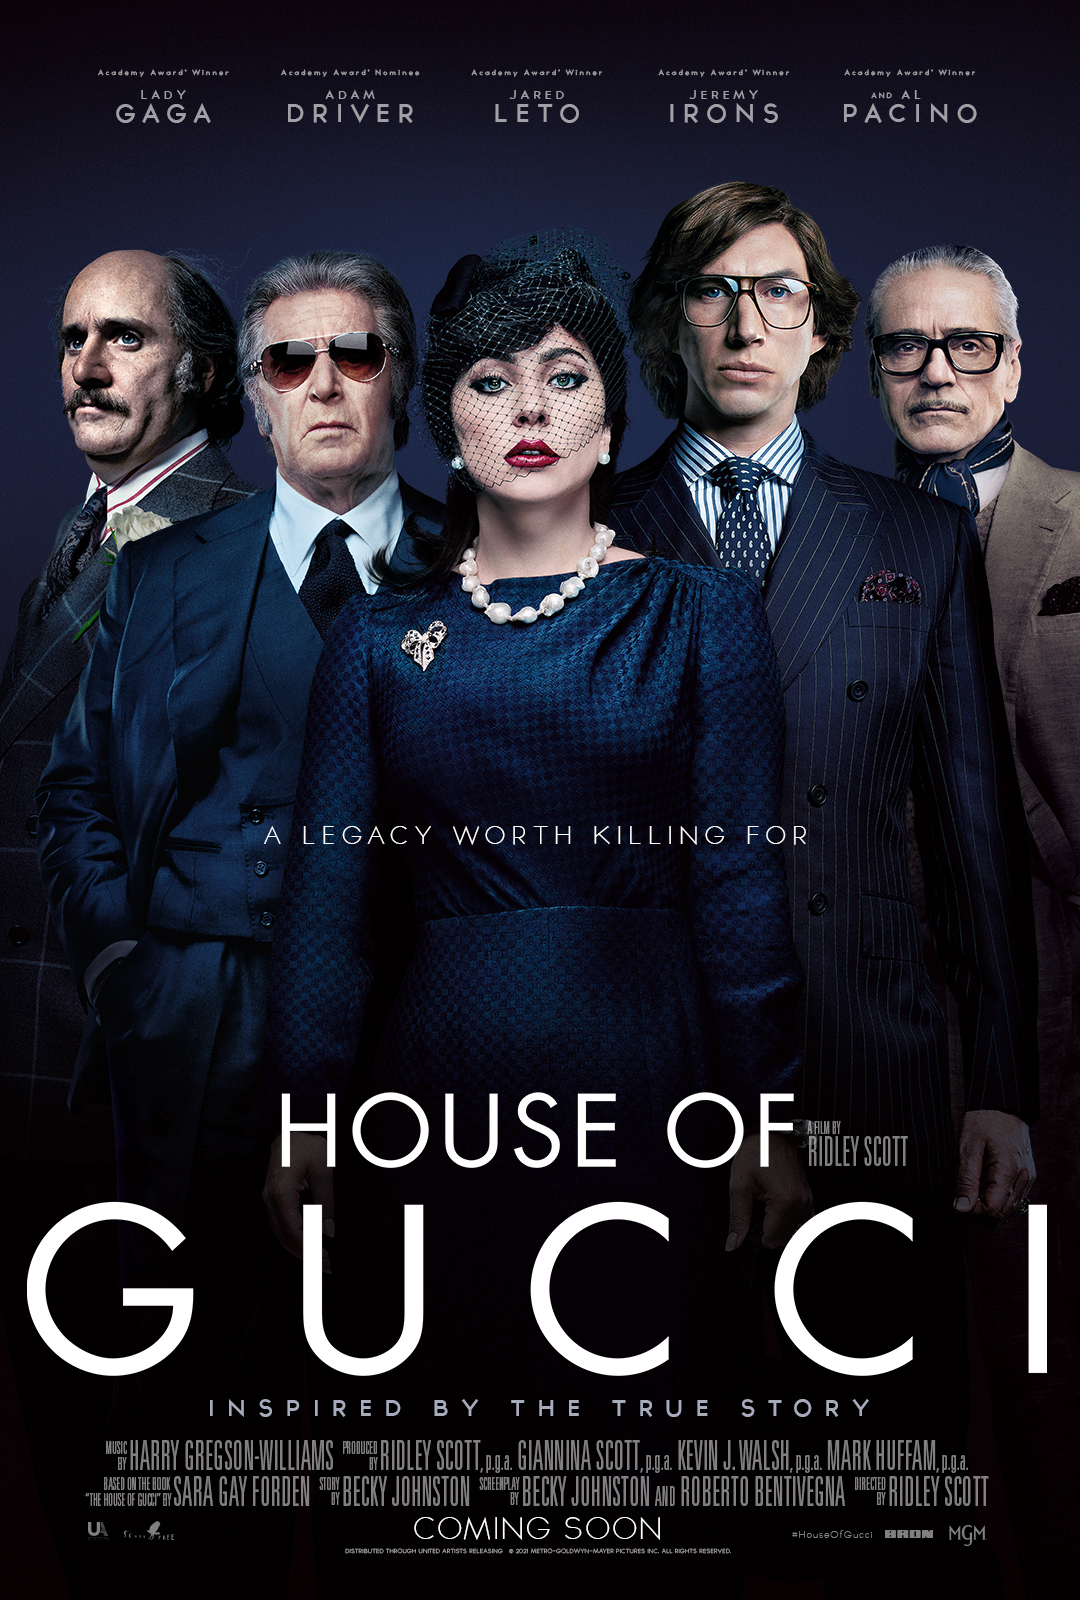 When Patrizia Reggiani, an outsider from humble beginnings, marries into the Gucci family, her unbridled ambition begins to unravel the family legacy and triggers a reckless spiral of betrayal, decadence, revenge -- and ultimately murder.